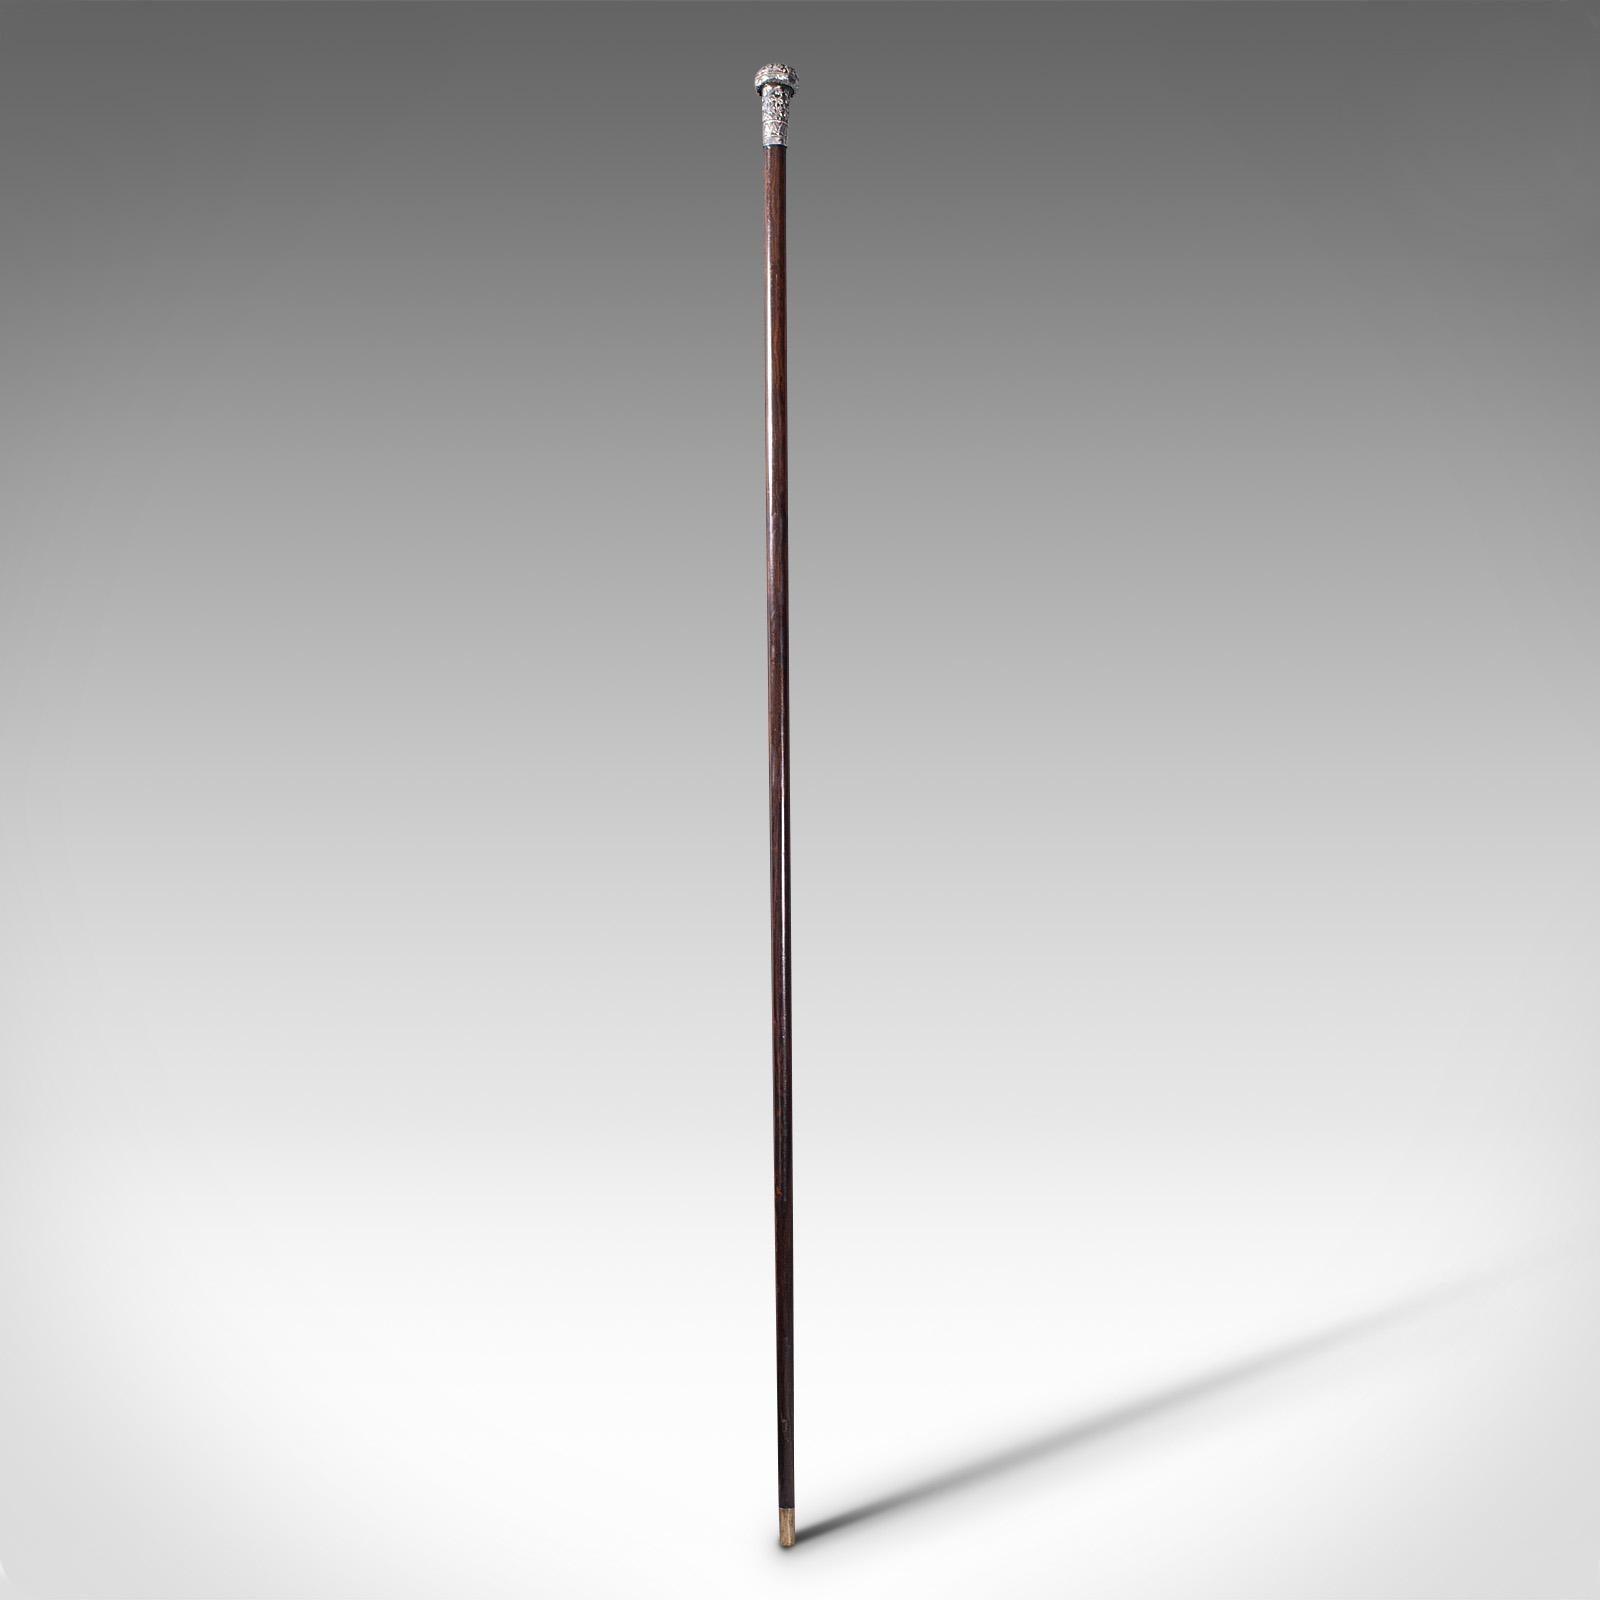 This is a pleasingly long antique colonial walking cane. An Anglo-Indian coromandel swagger stick with Indian silver handle, dating to the Georgian period, circa 1800.

Dashing gentleman's cane with delightful finish and appearance
Displays a